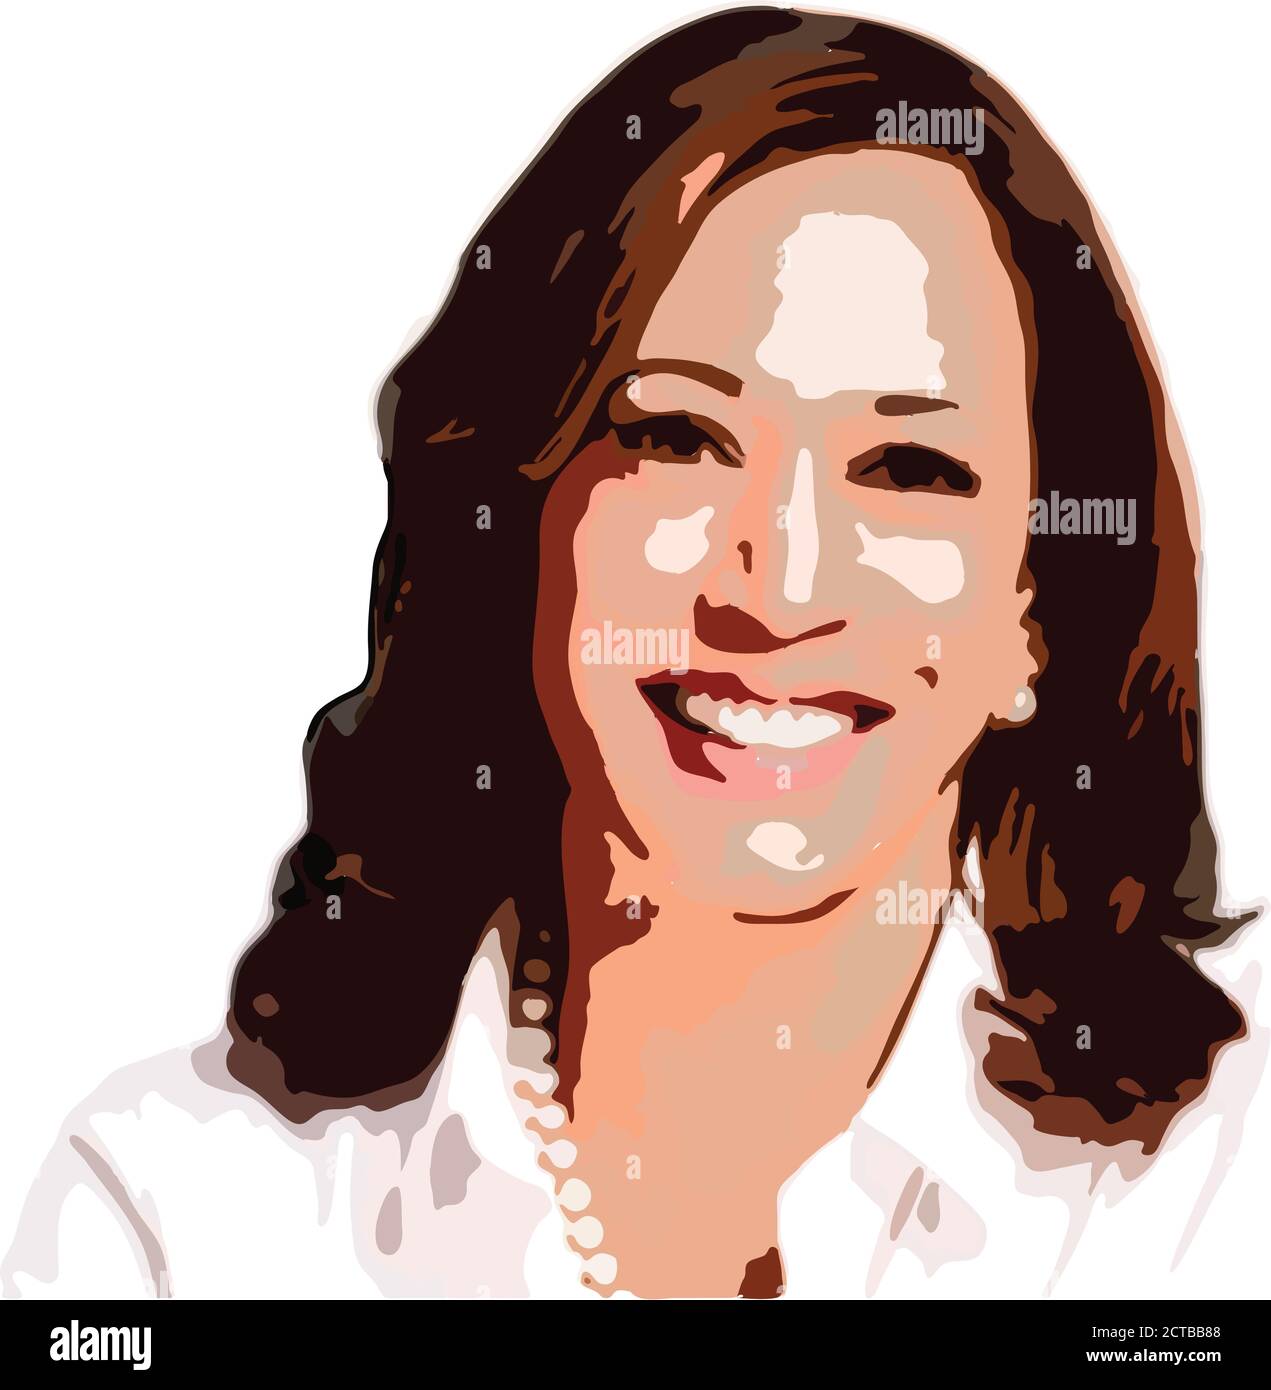 Vector portrait of Kamala Harris. Kamala Devi Harris (born October 20, 1964) is an American politician and attorney who has served as the junior Unite Stock Vector